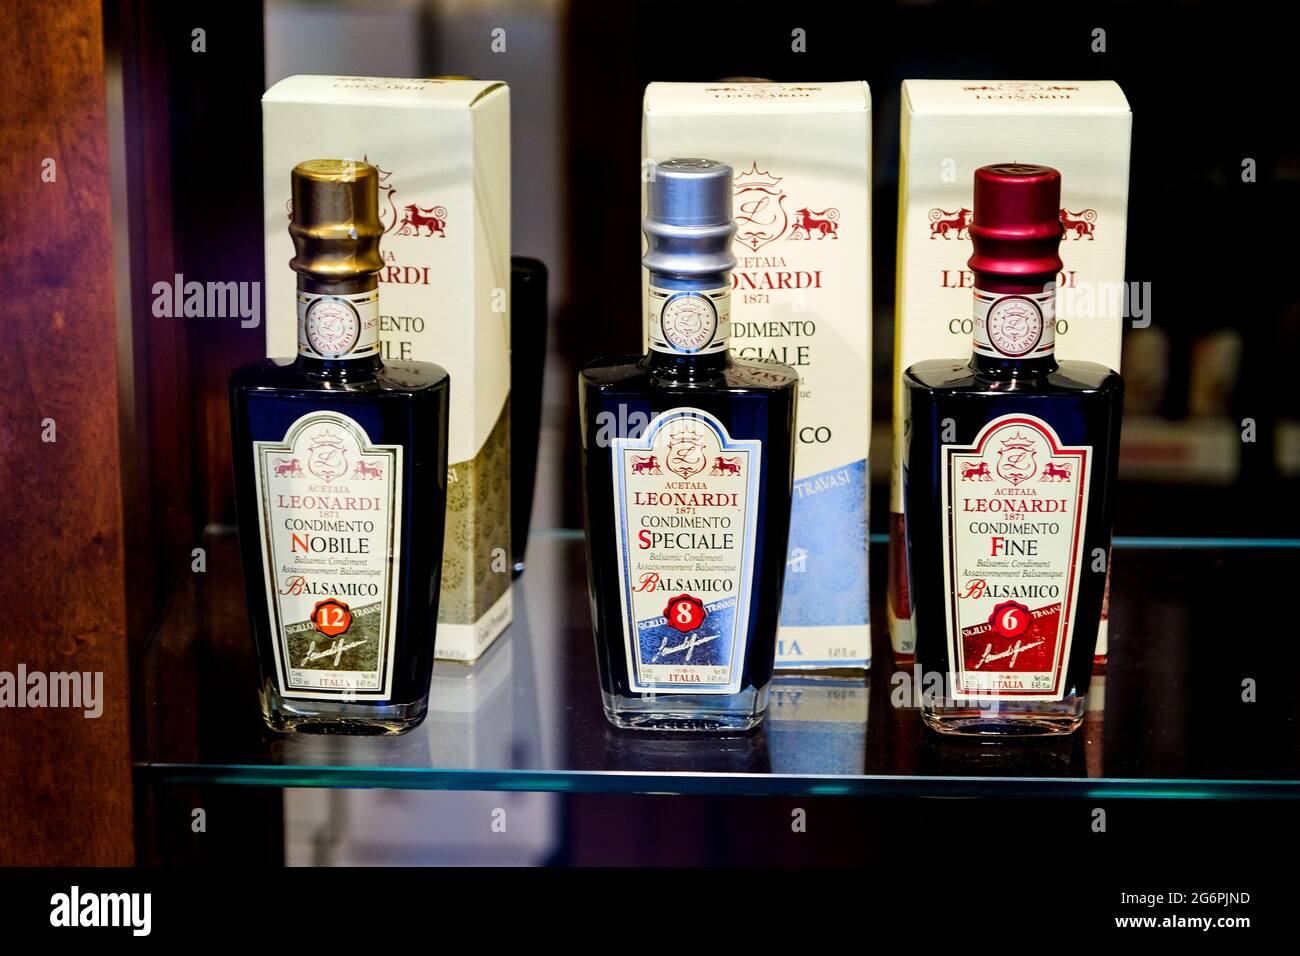 Bottles of aged Balsamic on display in Modena Italy Stock Photo